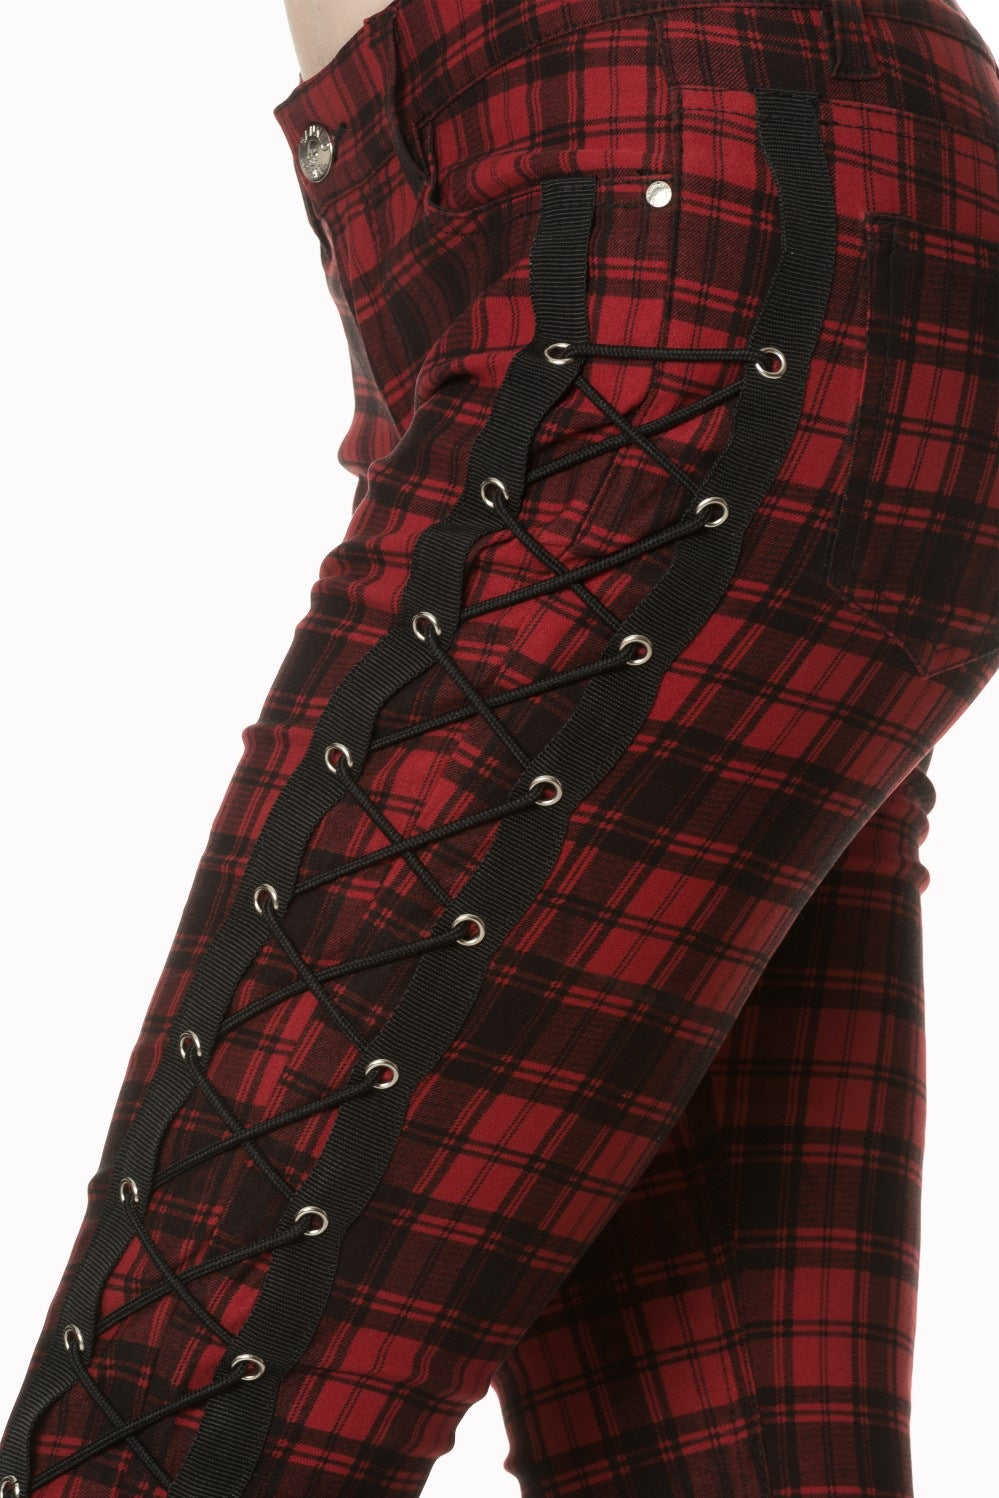 Low rise red check trousers with corset details on the side of the leg 